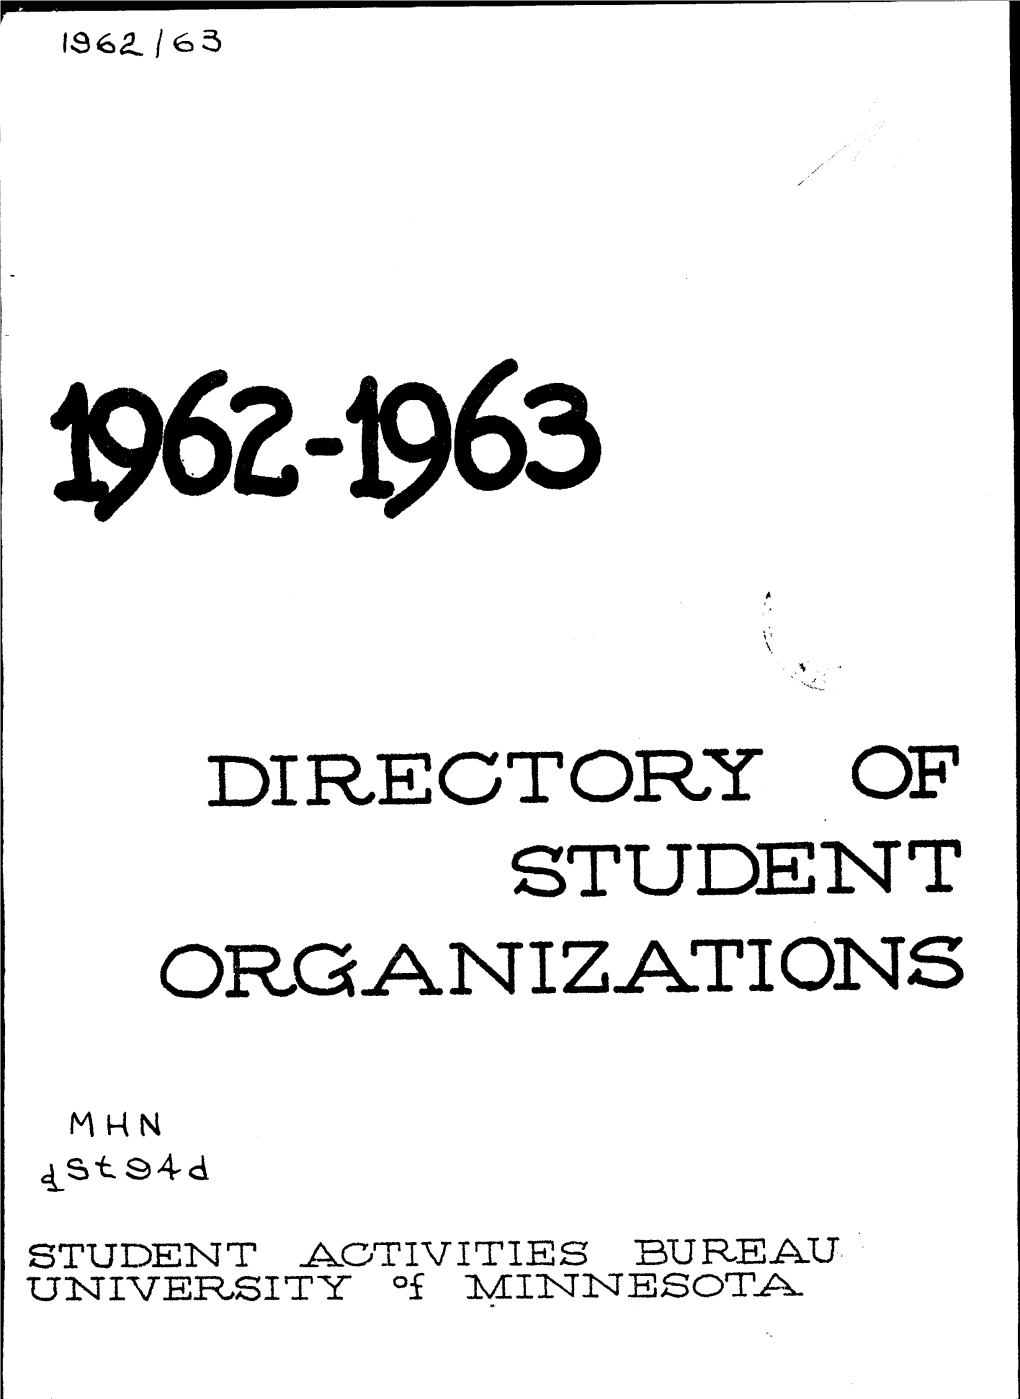 Directory of Student Organizations